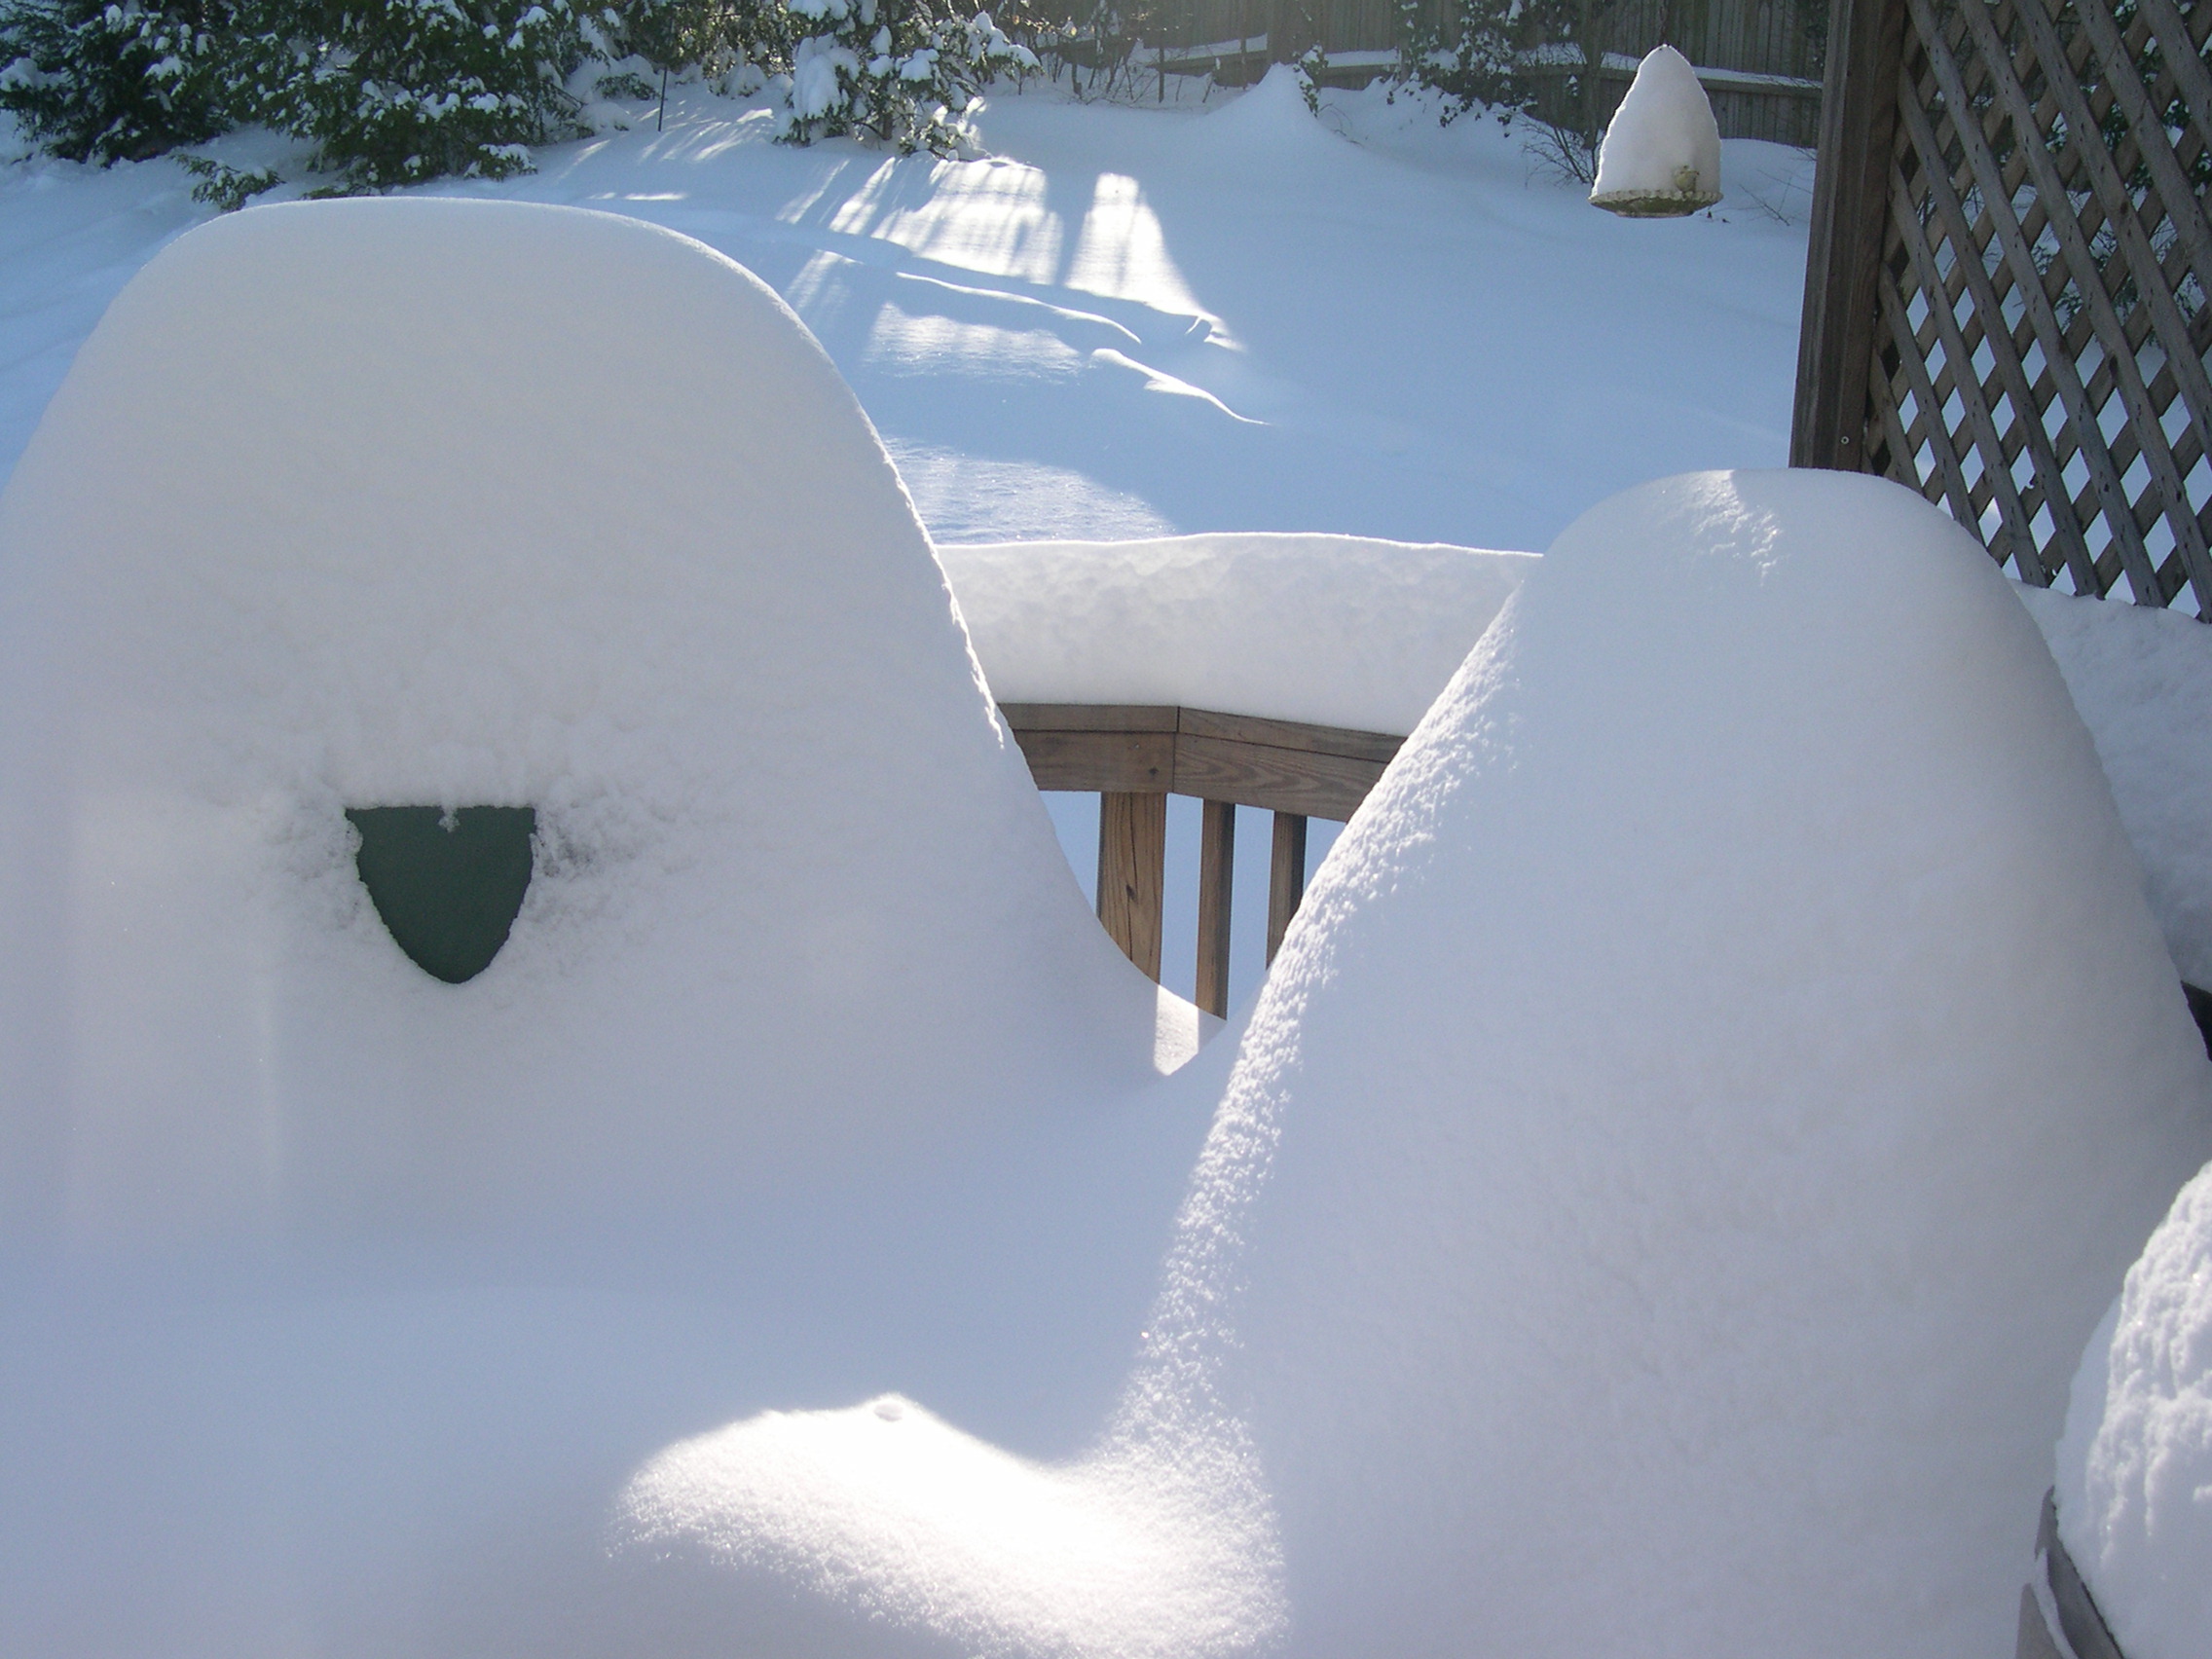 Snow-covered BBQs on deck.